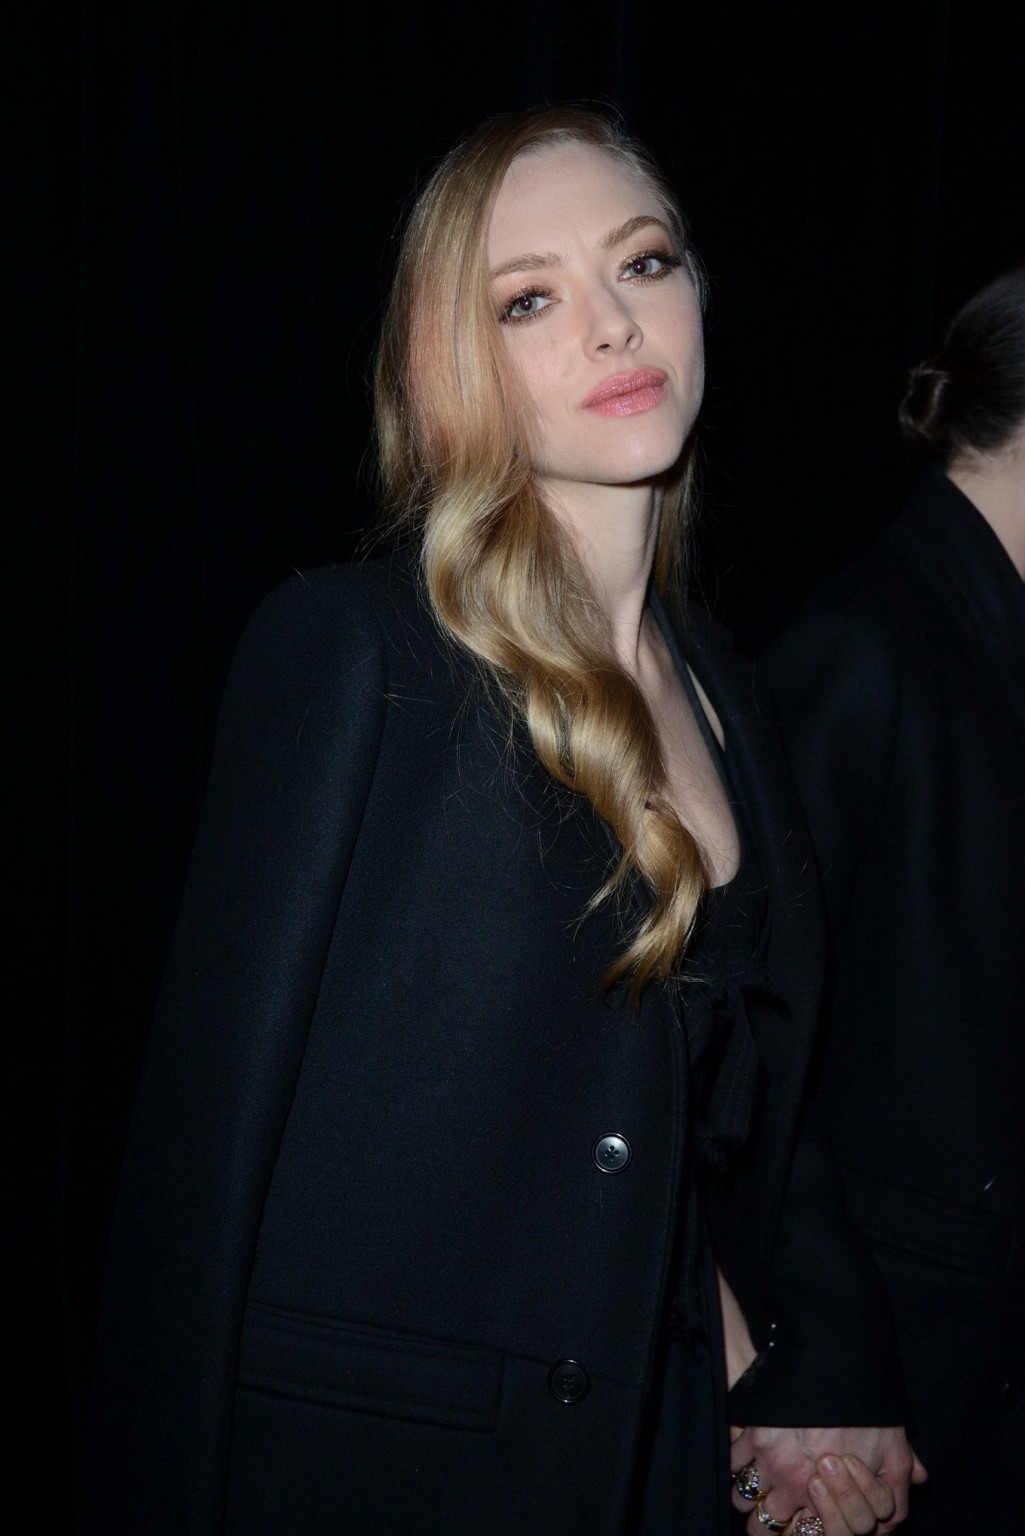 Amanda Seyfried showing big cleavage in black outfit while arriving to the Given #75170520